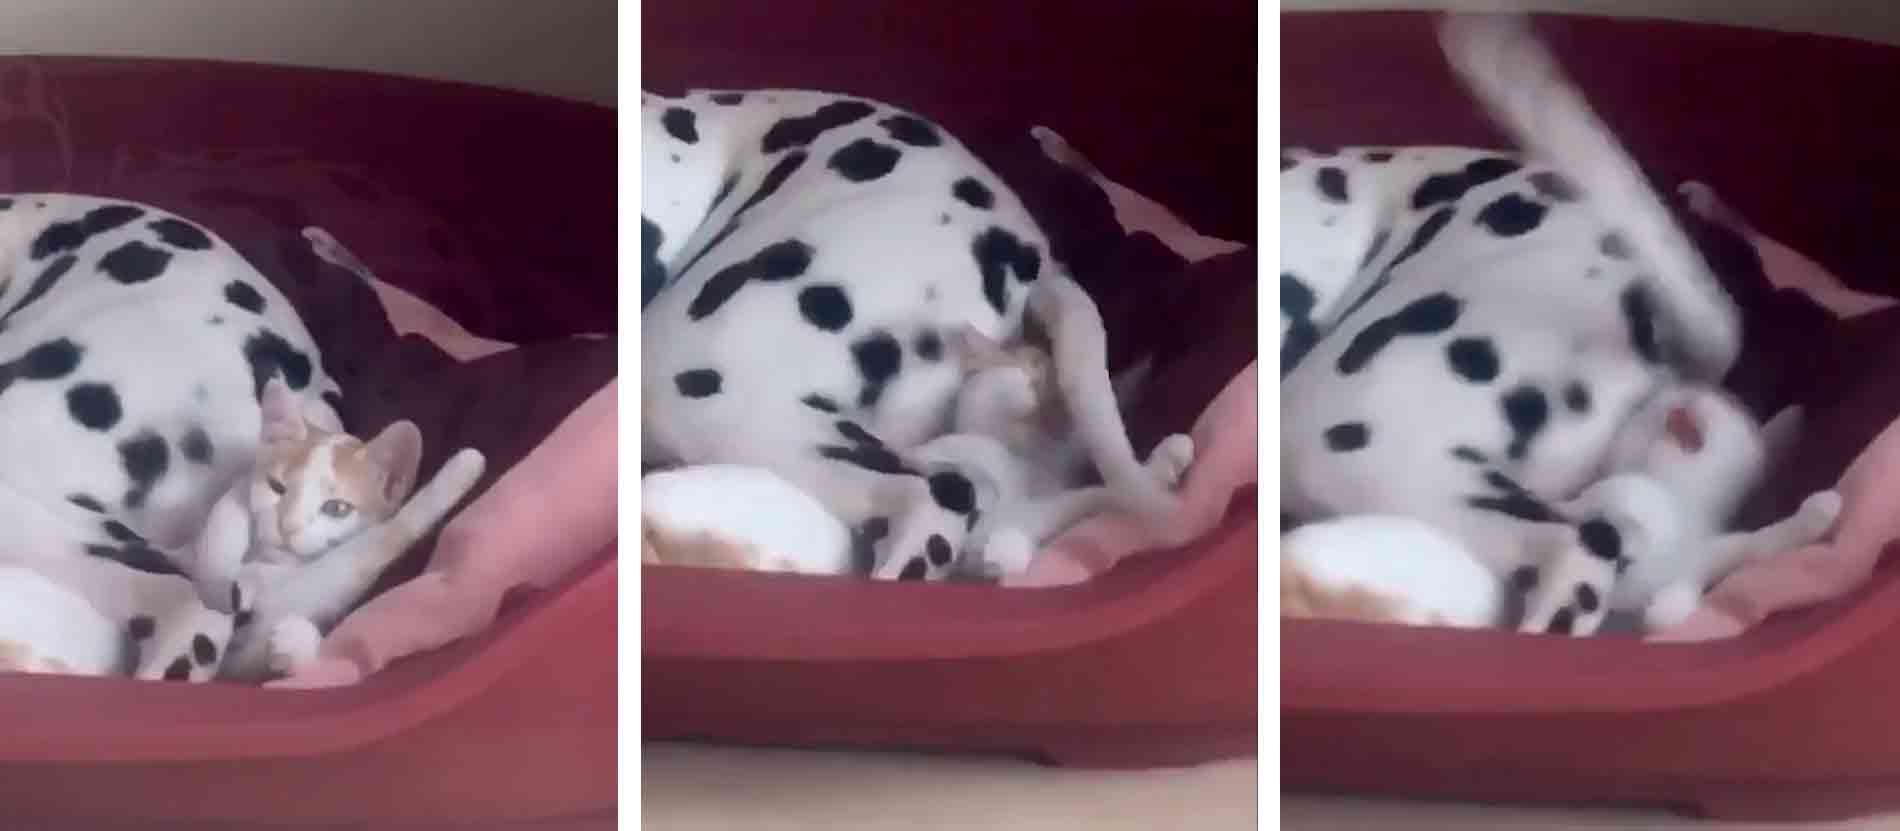 Hilarious video: with its tail, the Dalmatian dog doesn't leave the kitten in peace (Photo: Reproduction/Reddit)